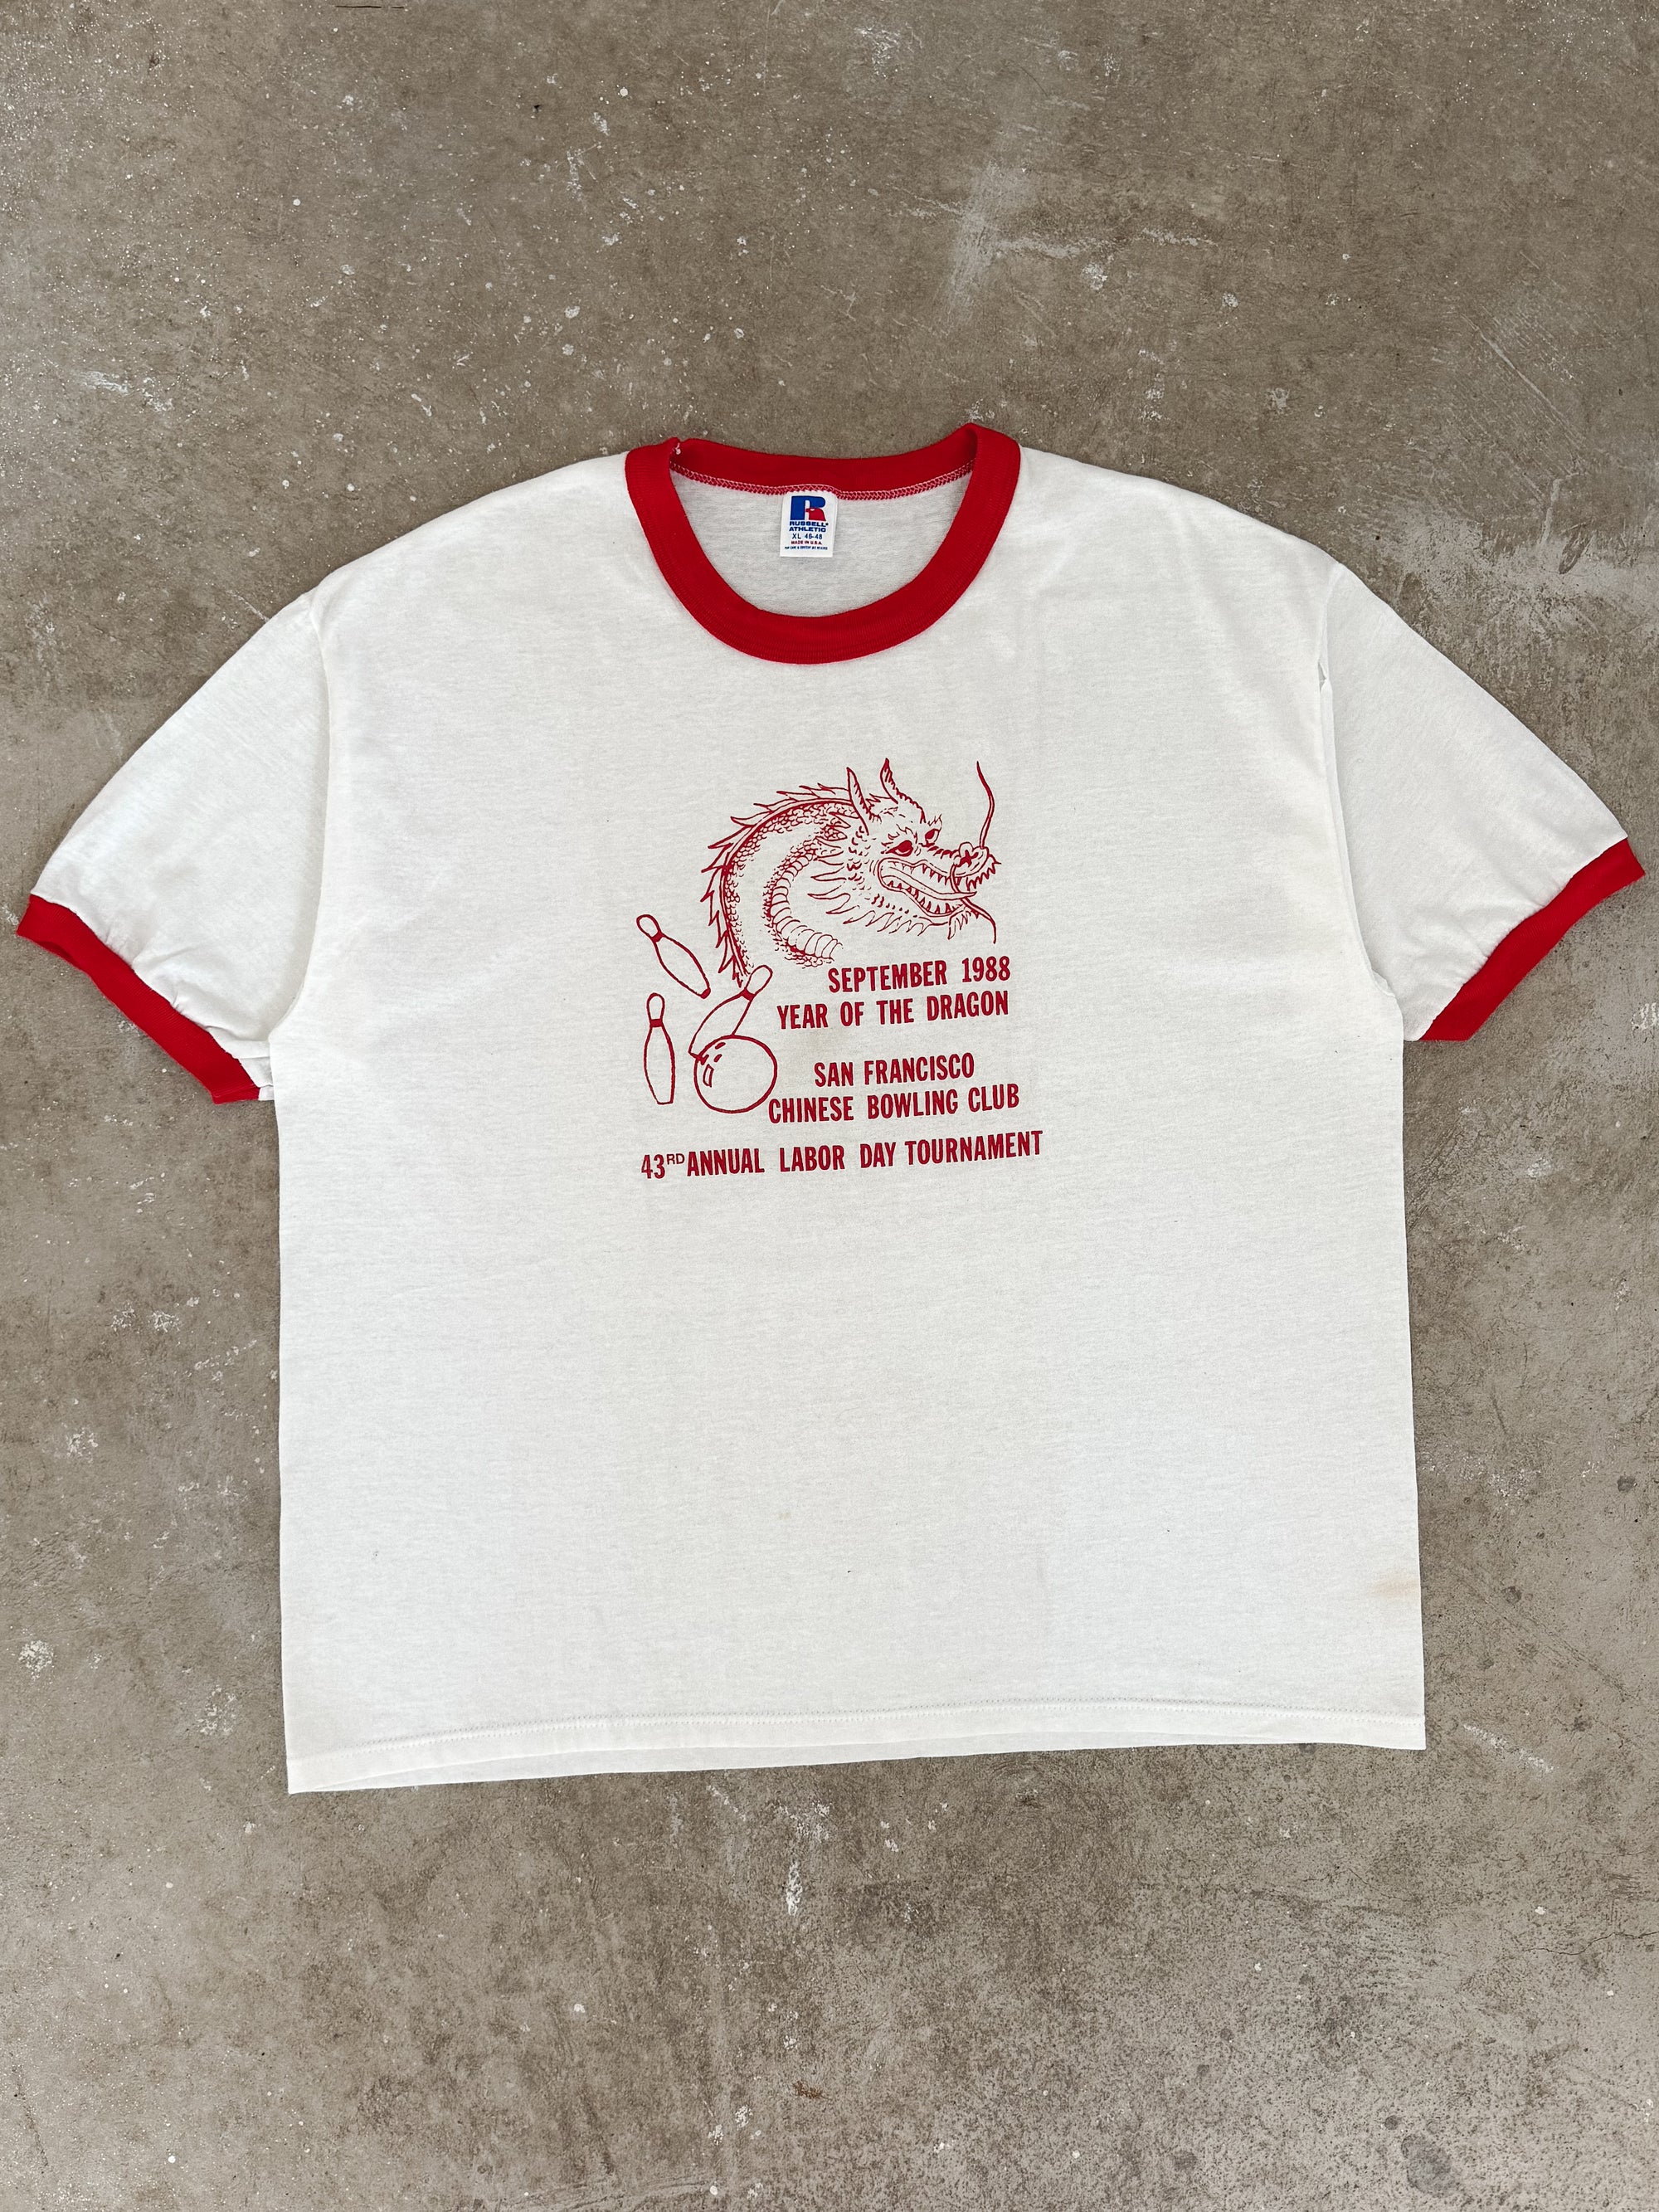 1980s Russell "Chinese Bowling Club" Ringer Tee (L/XL)